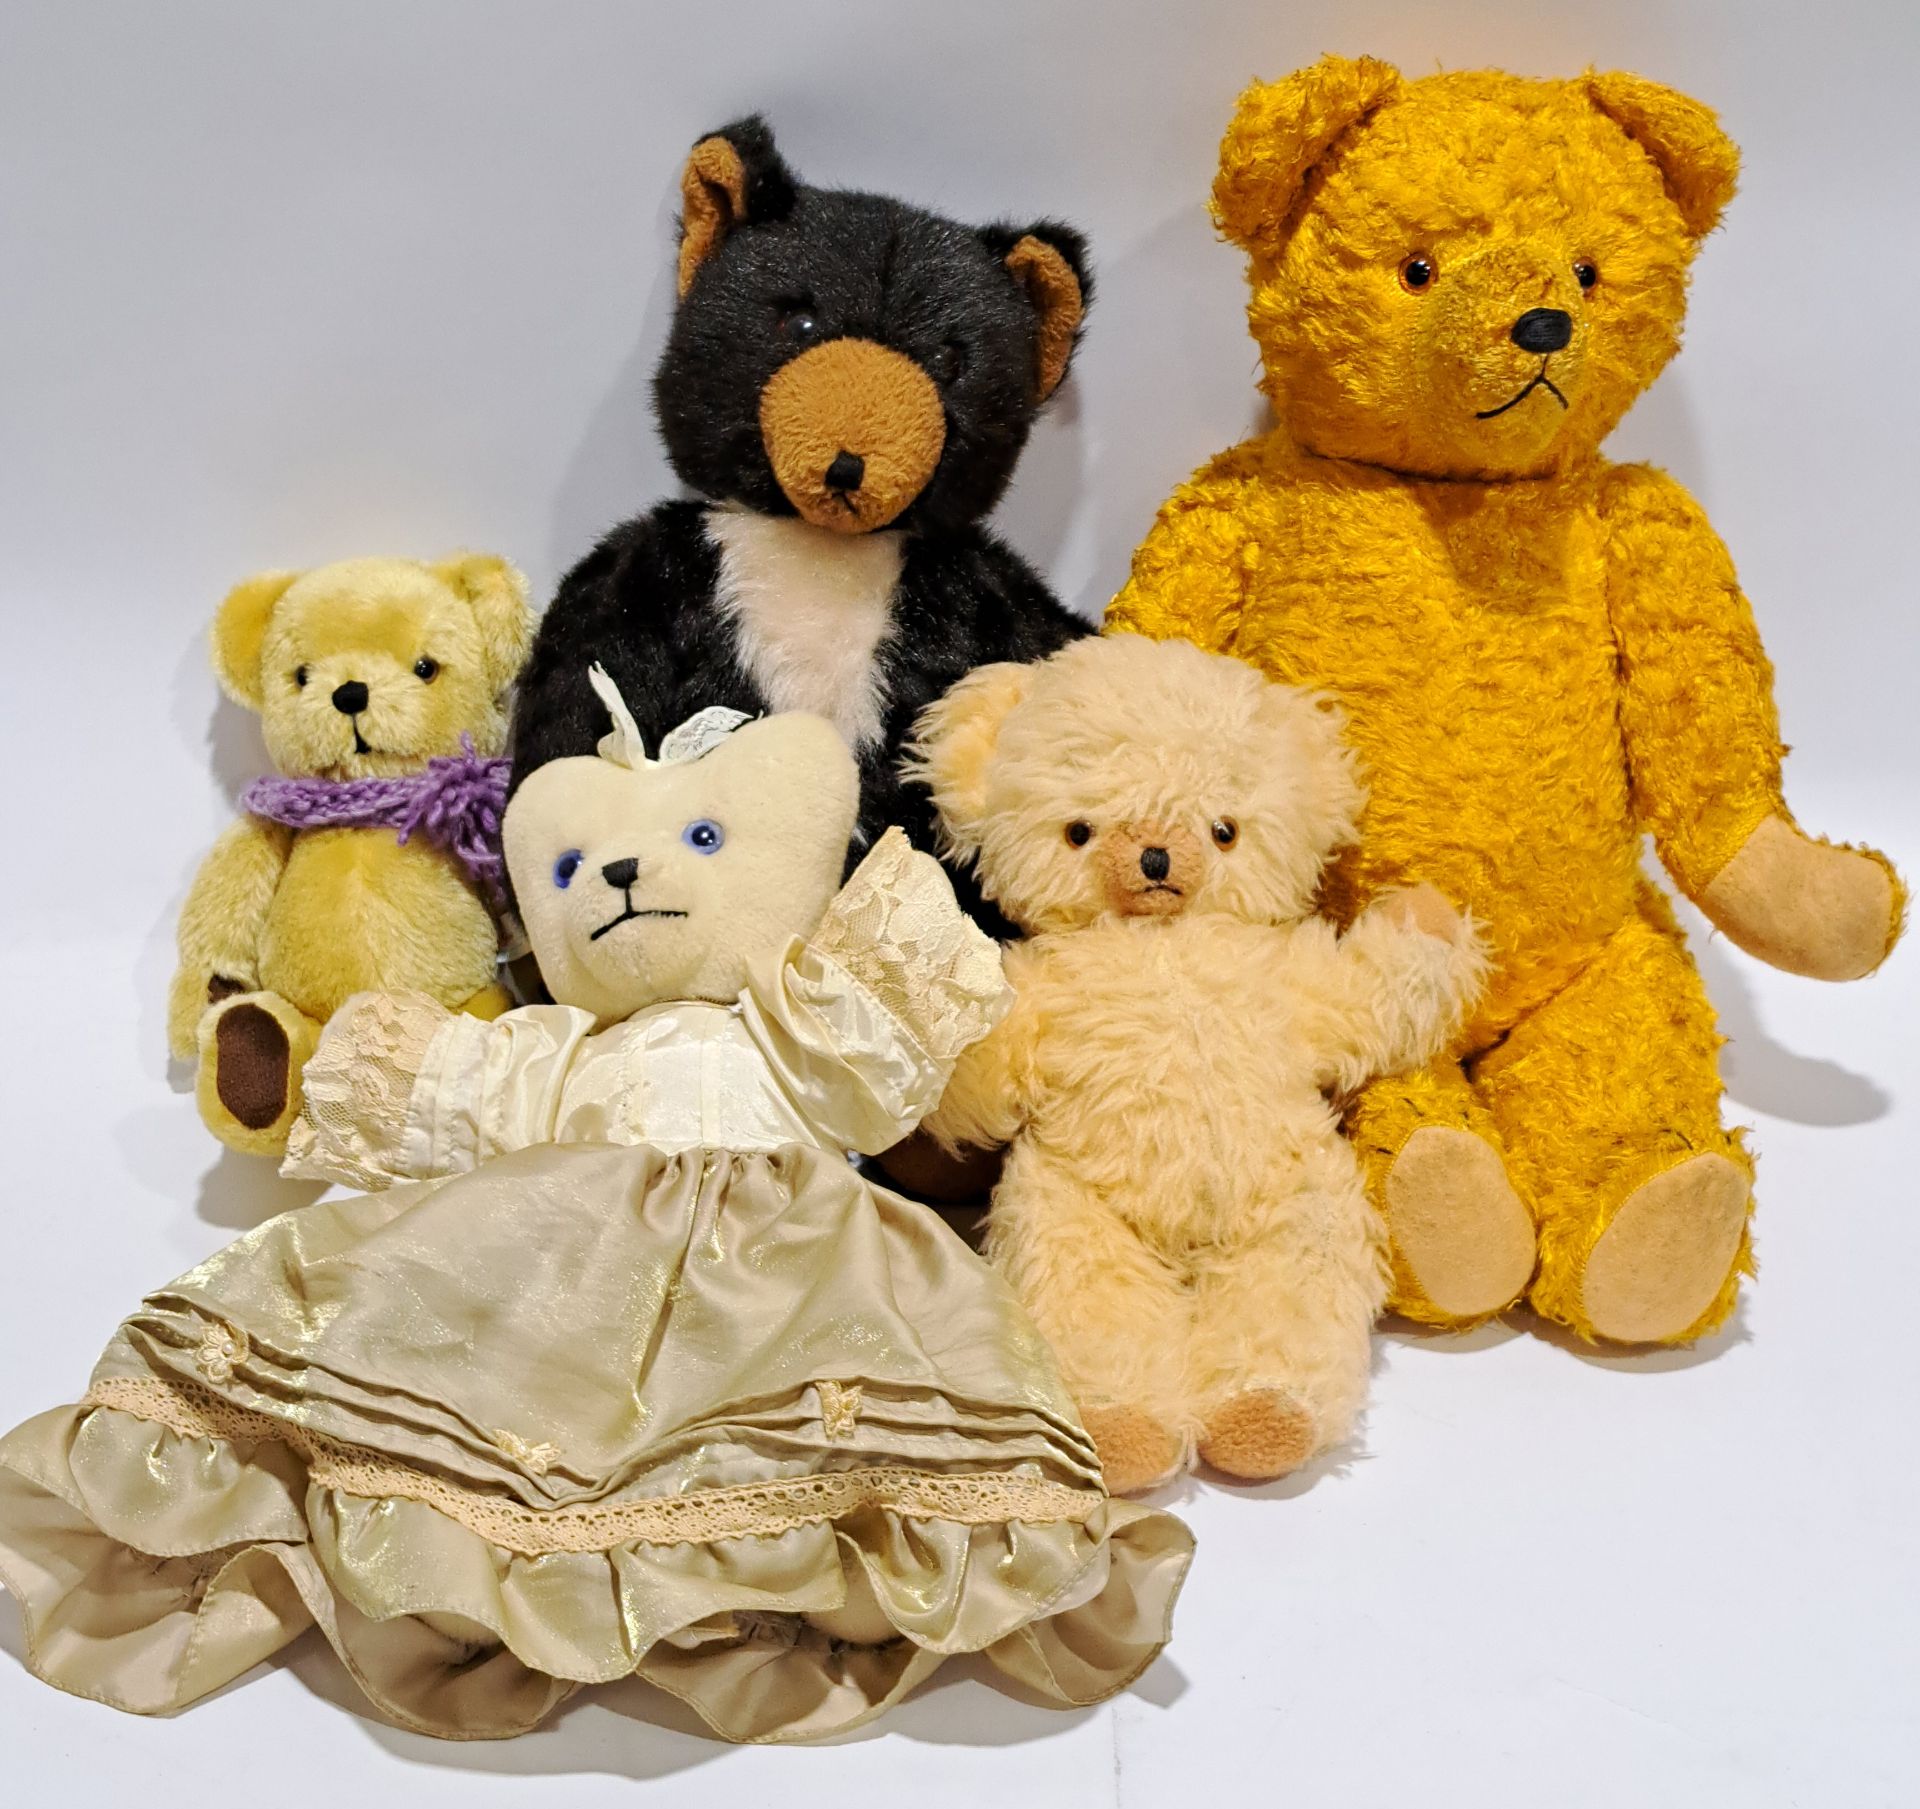 Collection of vintage teddy bears including Pedigree and Dean's